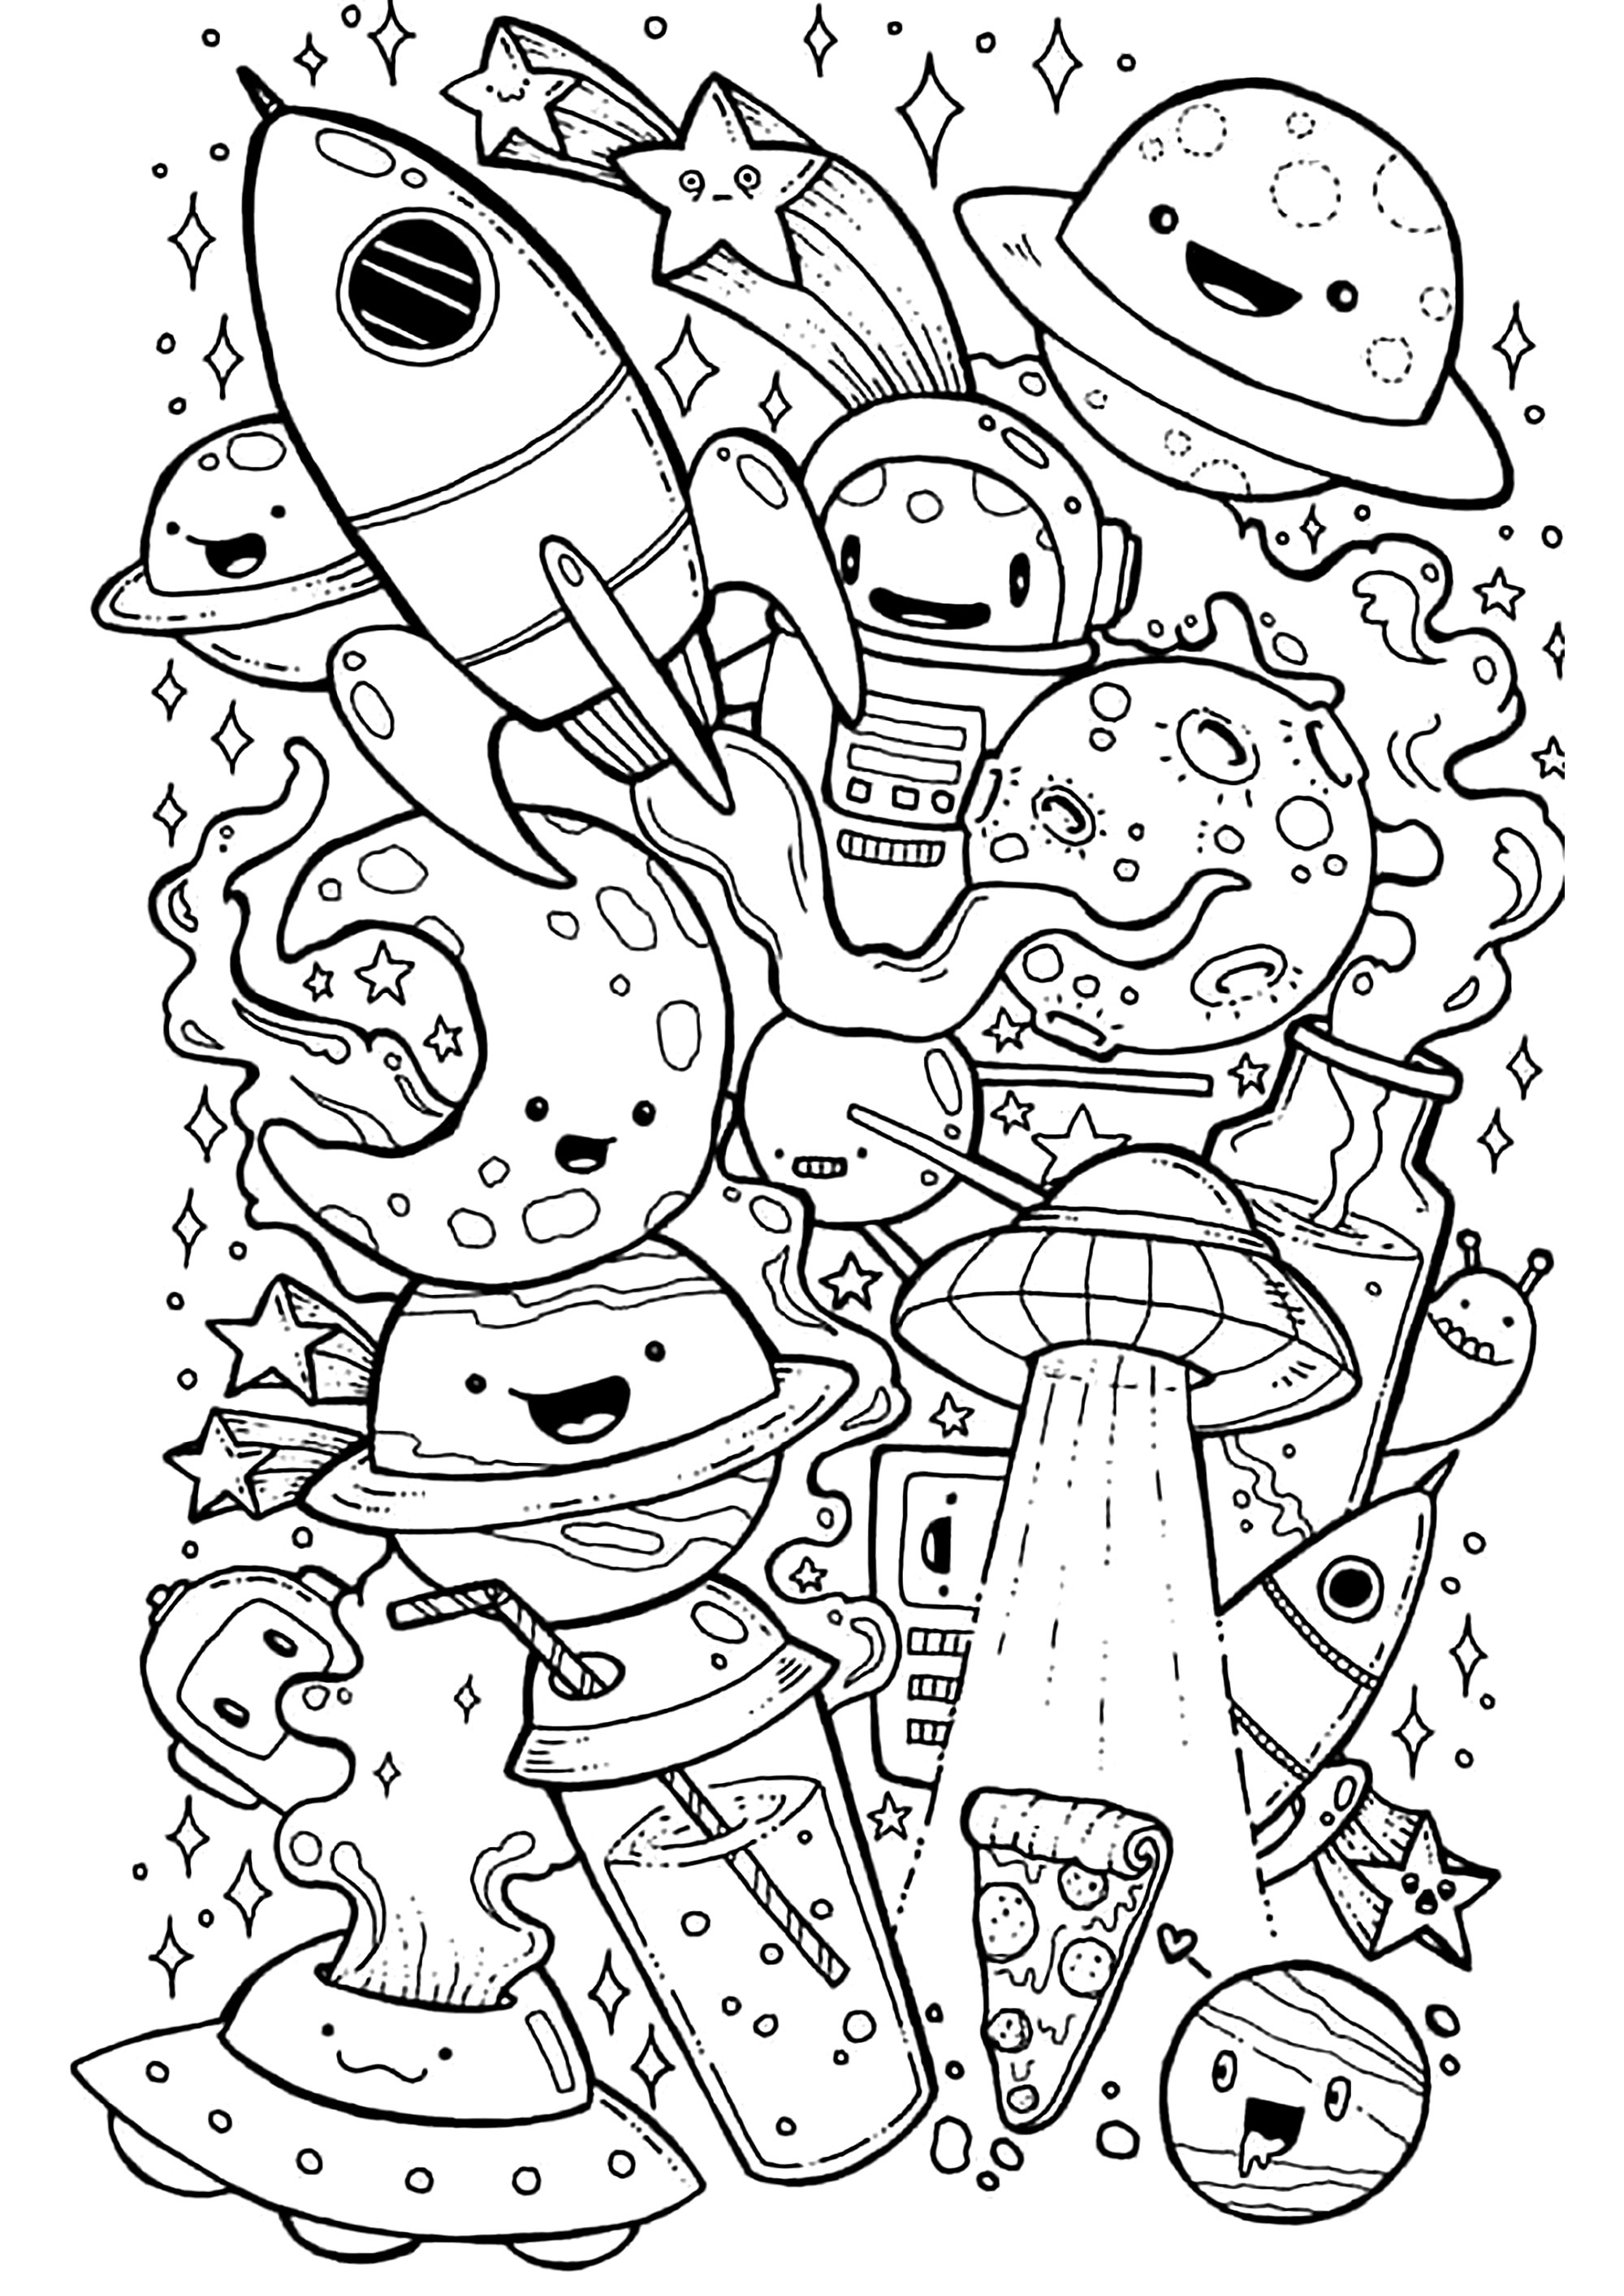 Doodle-art-doodling-58191 - Doodle Art / Doodling Adult Coloring Pages